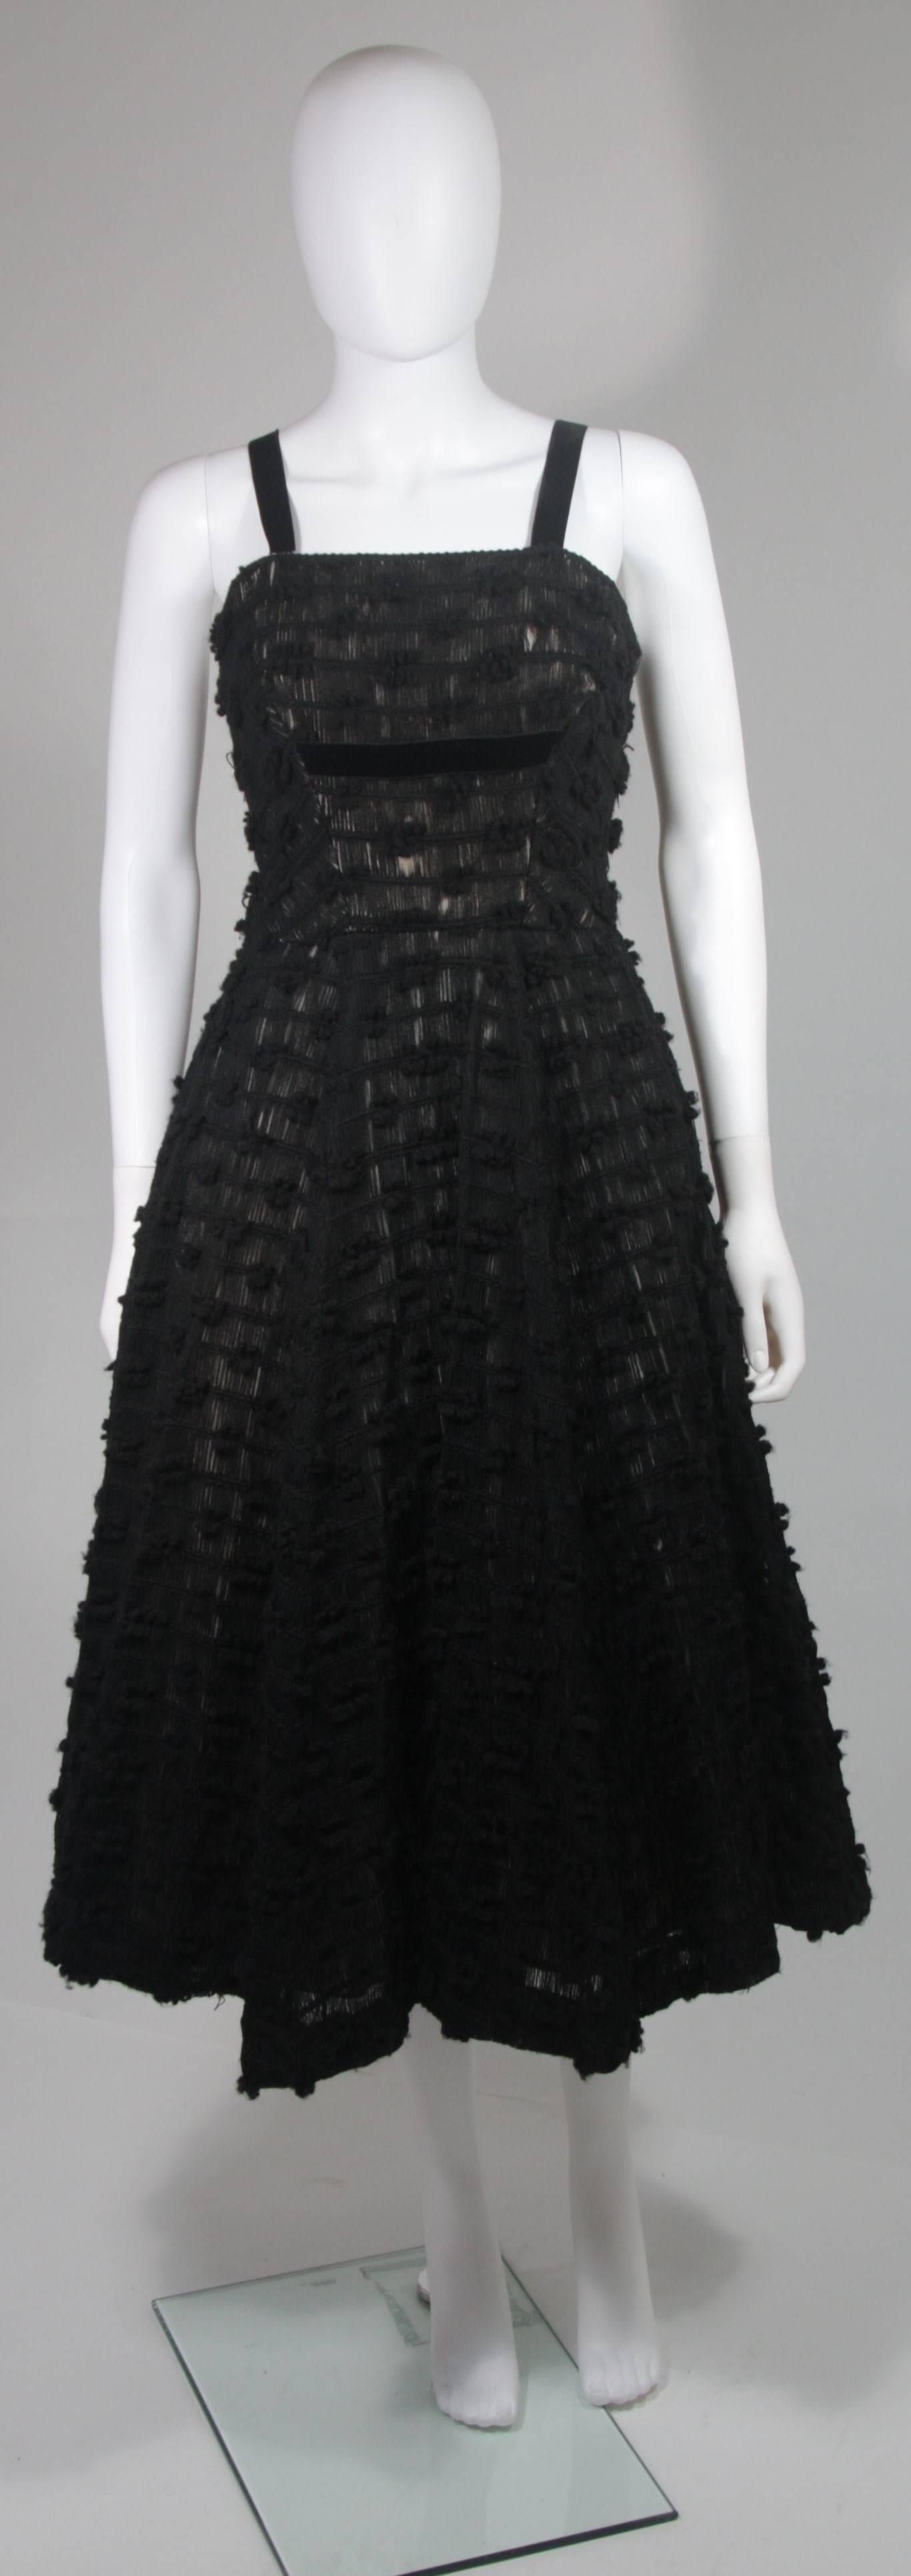 This Rappi cocktail dress is composed of a black knit and features a velvet ribbon accent. There is a zipper closure. This garment is in great vintage condition, excellent for design research, there are some areas of  wear on the knit. 

**Please